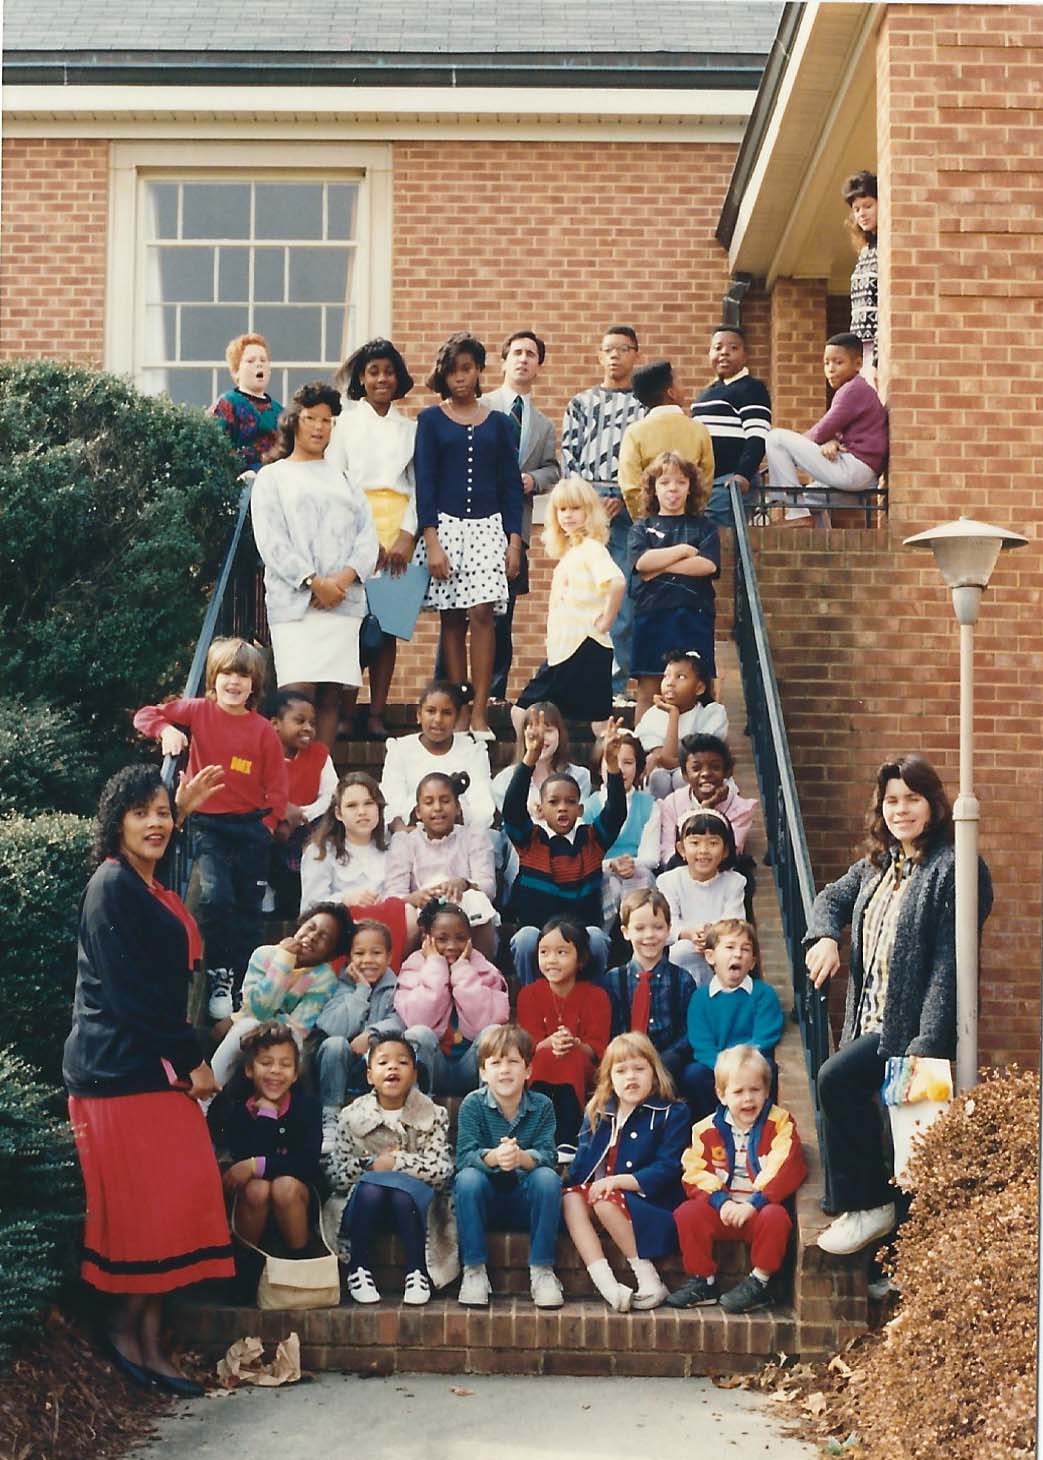 Sunday school class picture from 1989